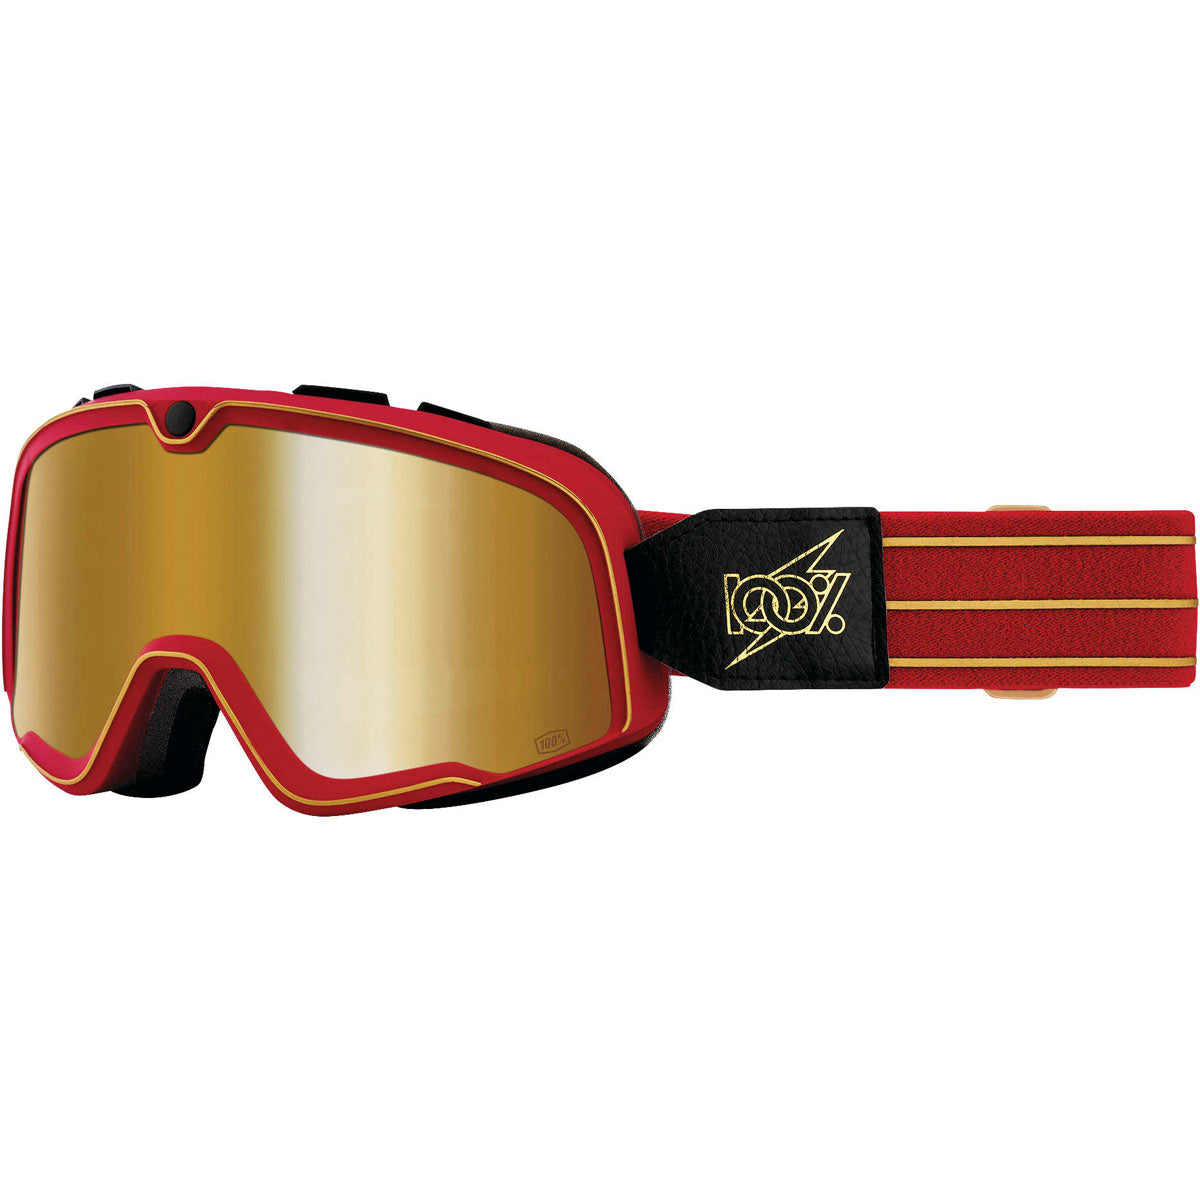 100% Barstow Goggles Cartier / True Gold Lens